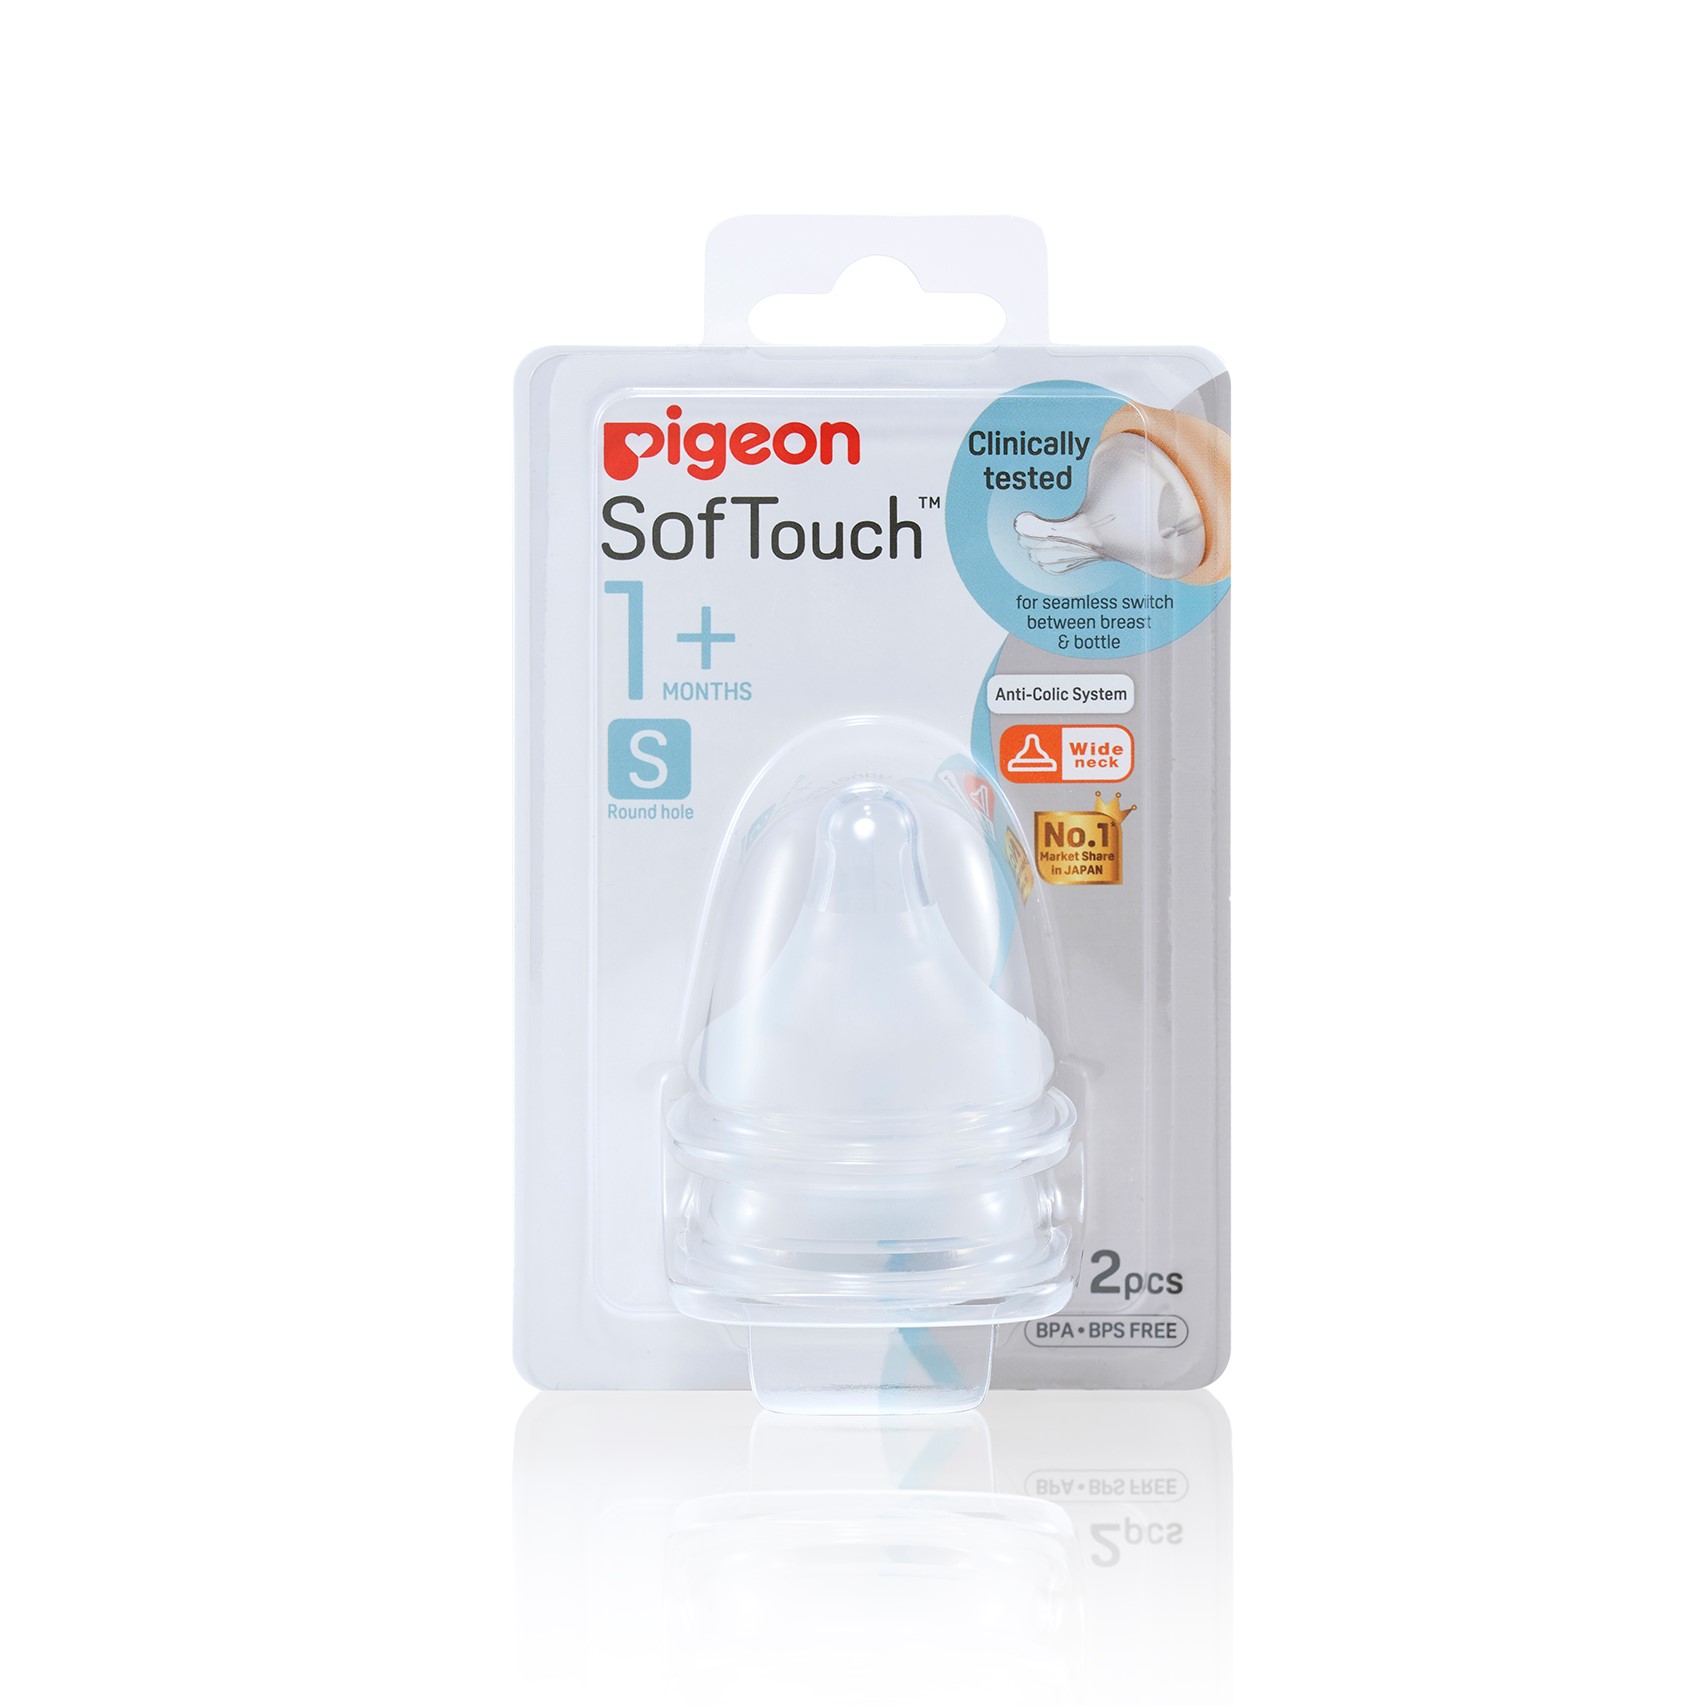 Pigeon SofTouch Nipple Blister Pack 2Pcs (S) (PG-78479)